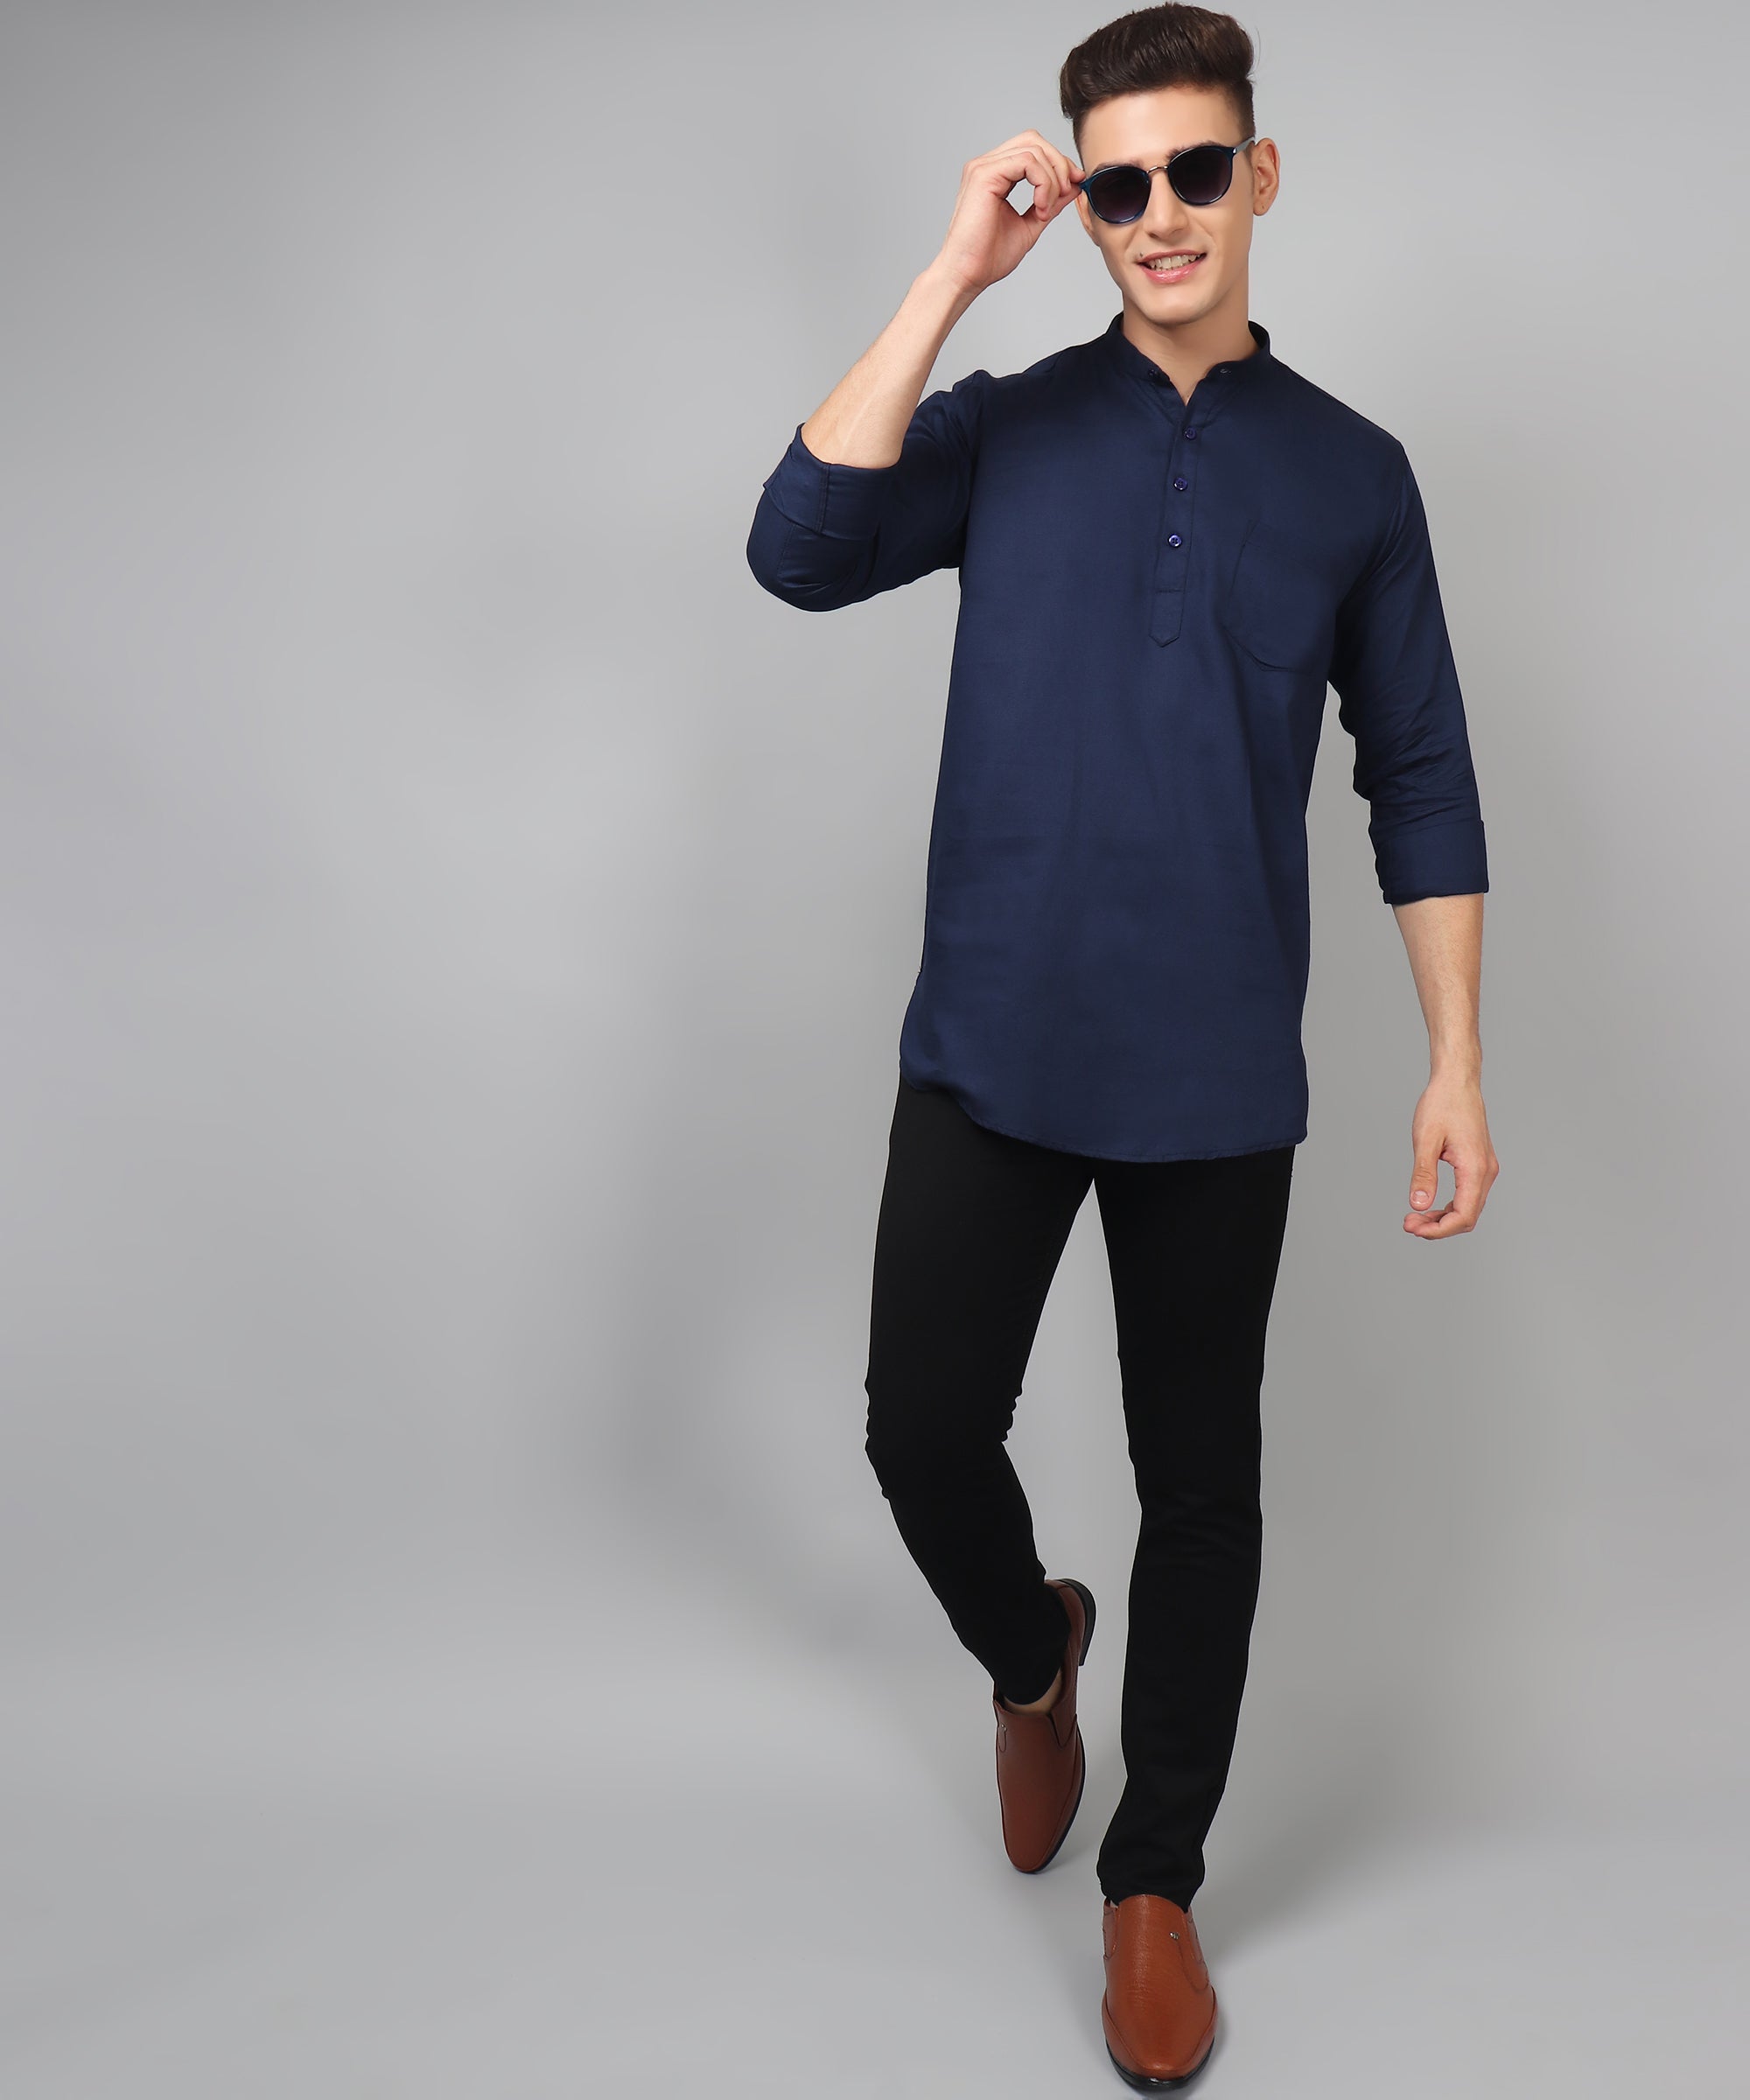 The Quintessential Elegance: Embracing the Timeless Appeal of Classic Cotton Shirts for Men